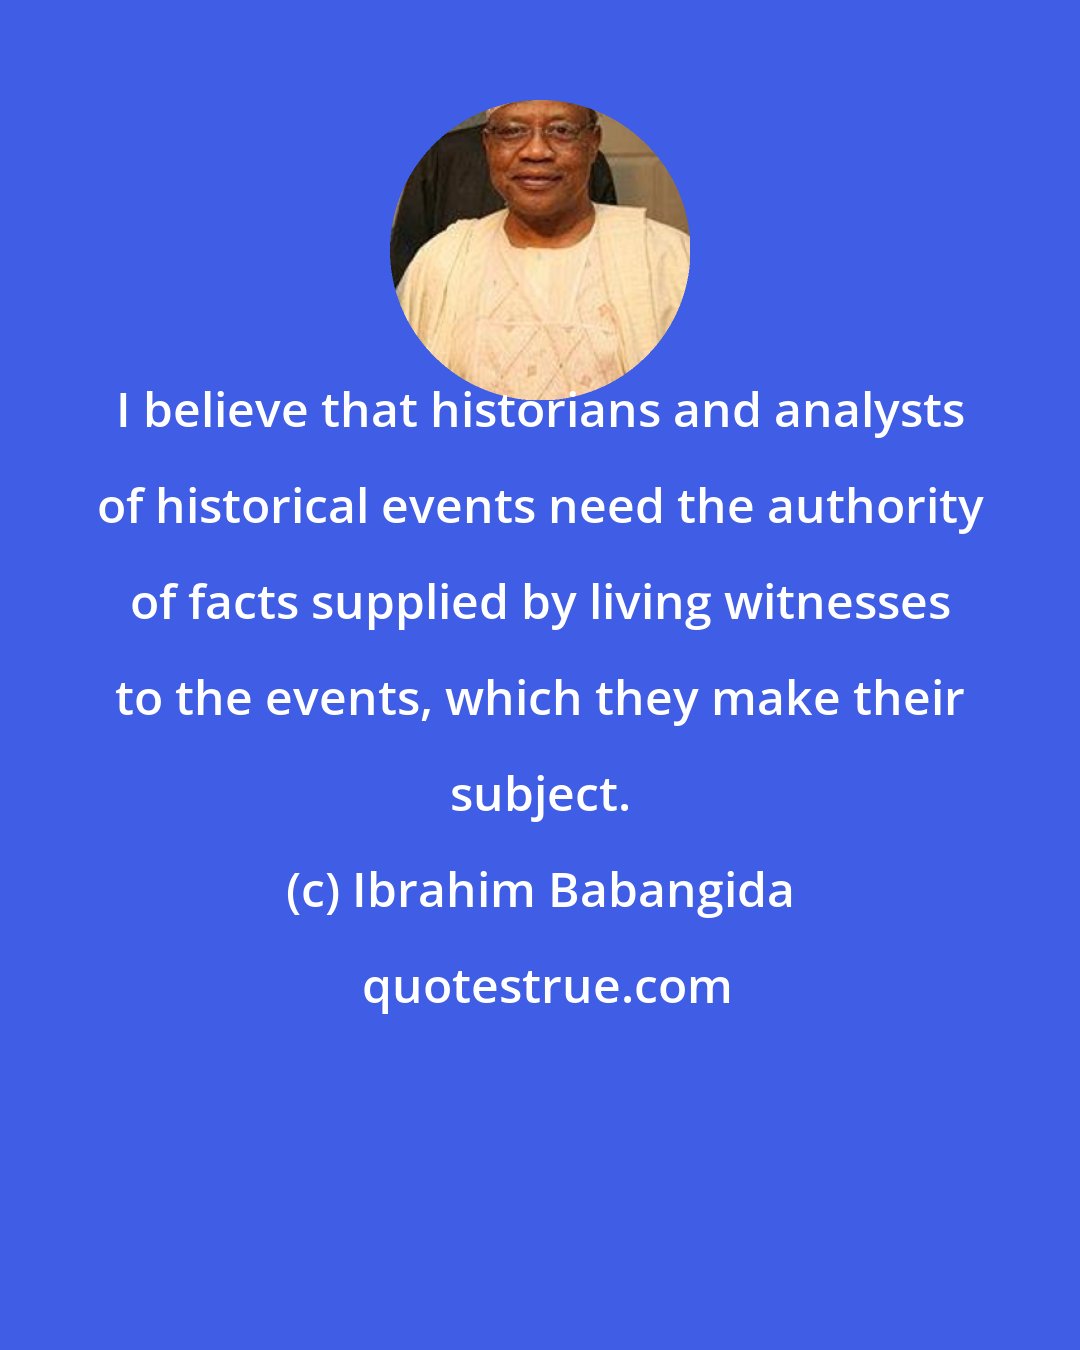 Ibrahim Babangida: I believe that historians and analysts of historical events need the authority of facts supplied by living witnesses to the events, which they make their subject.